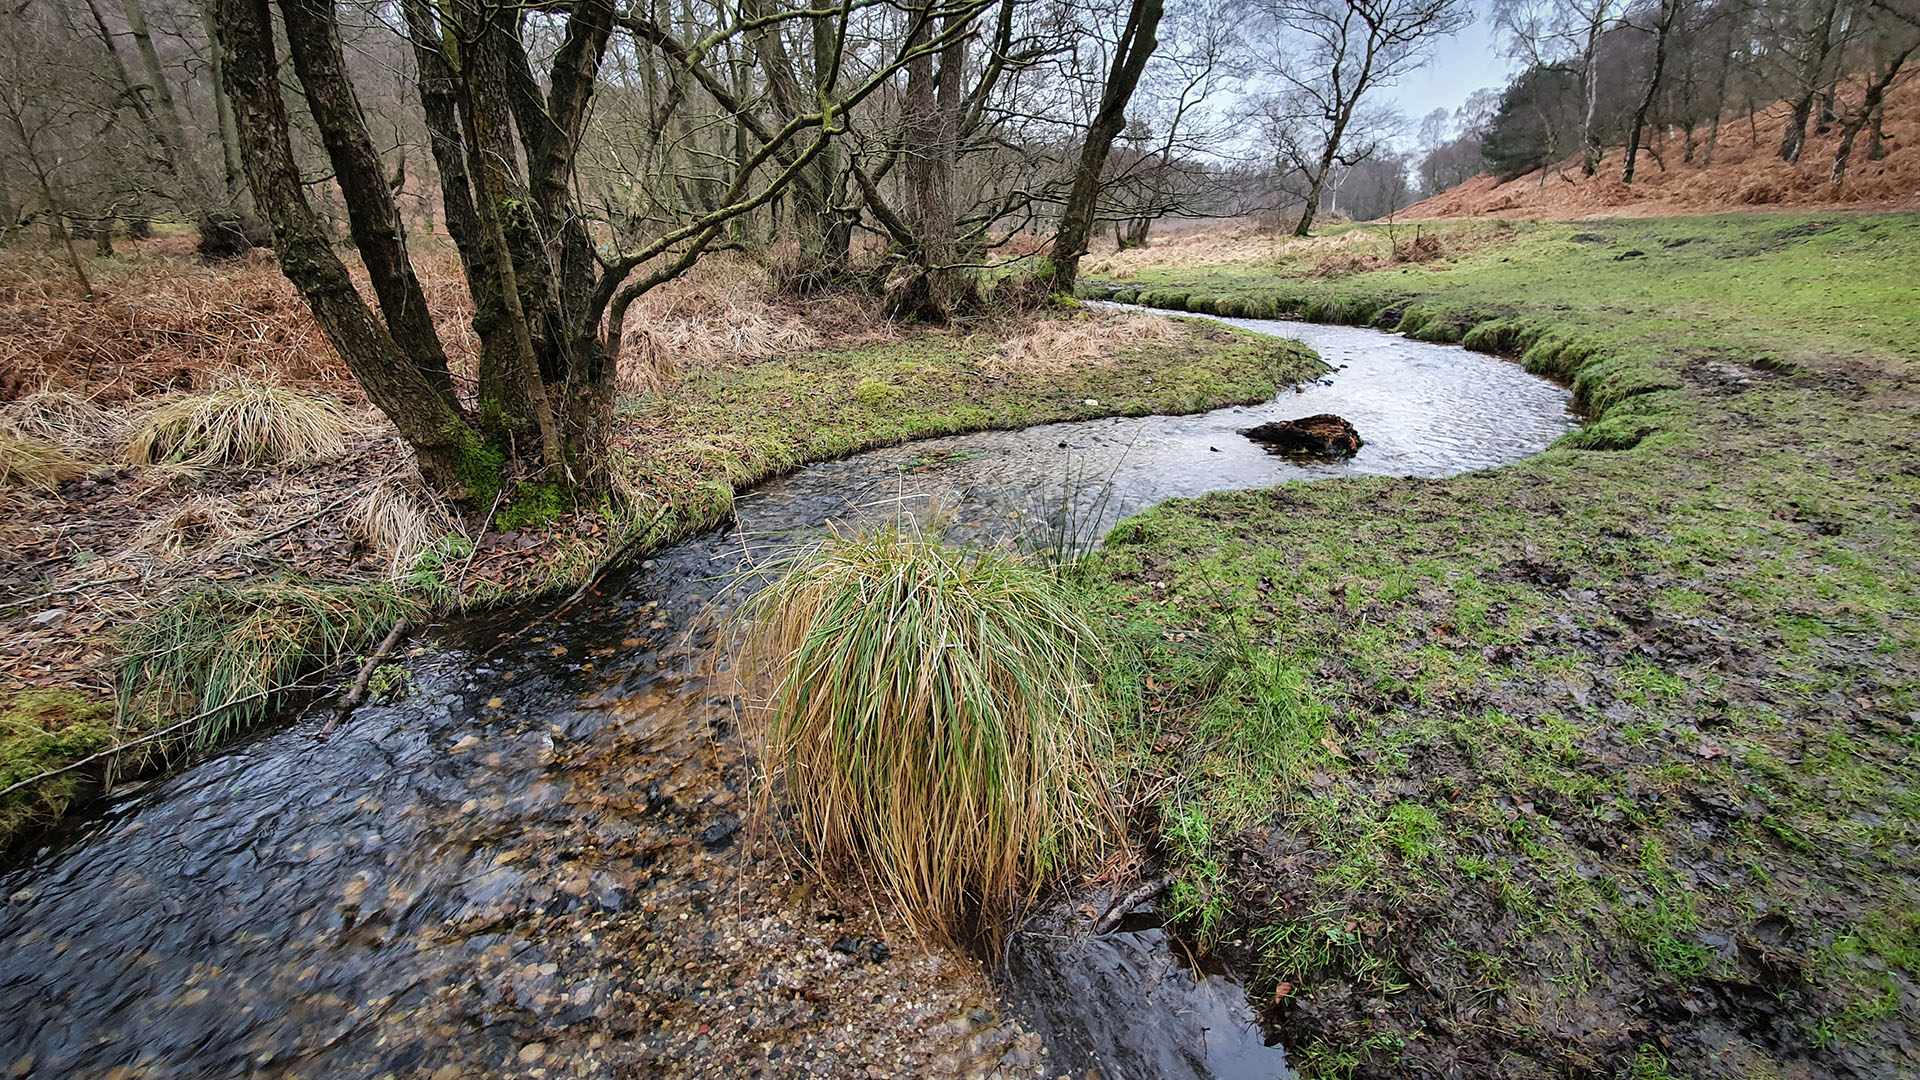 A meandering section of the pretty Sher Brook near Devil's Dumble